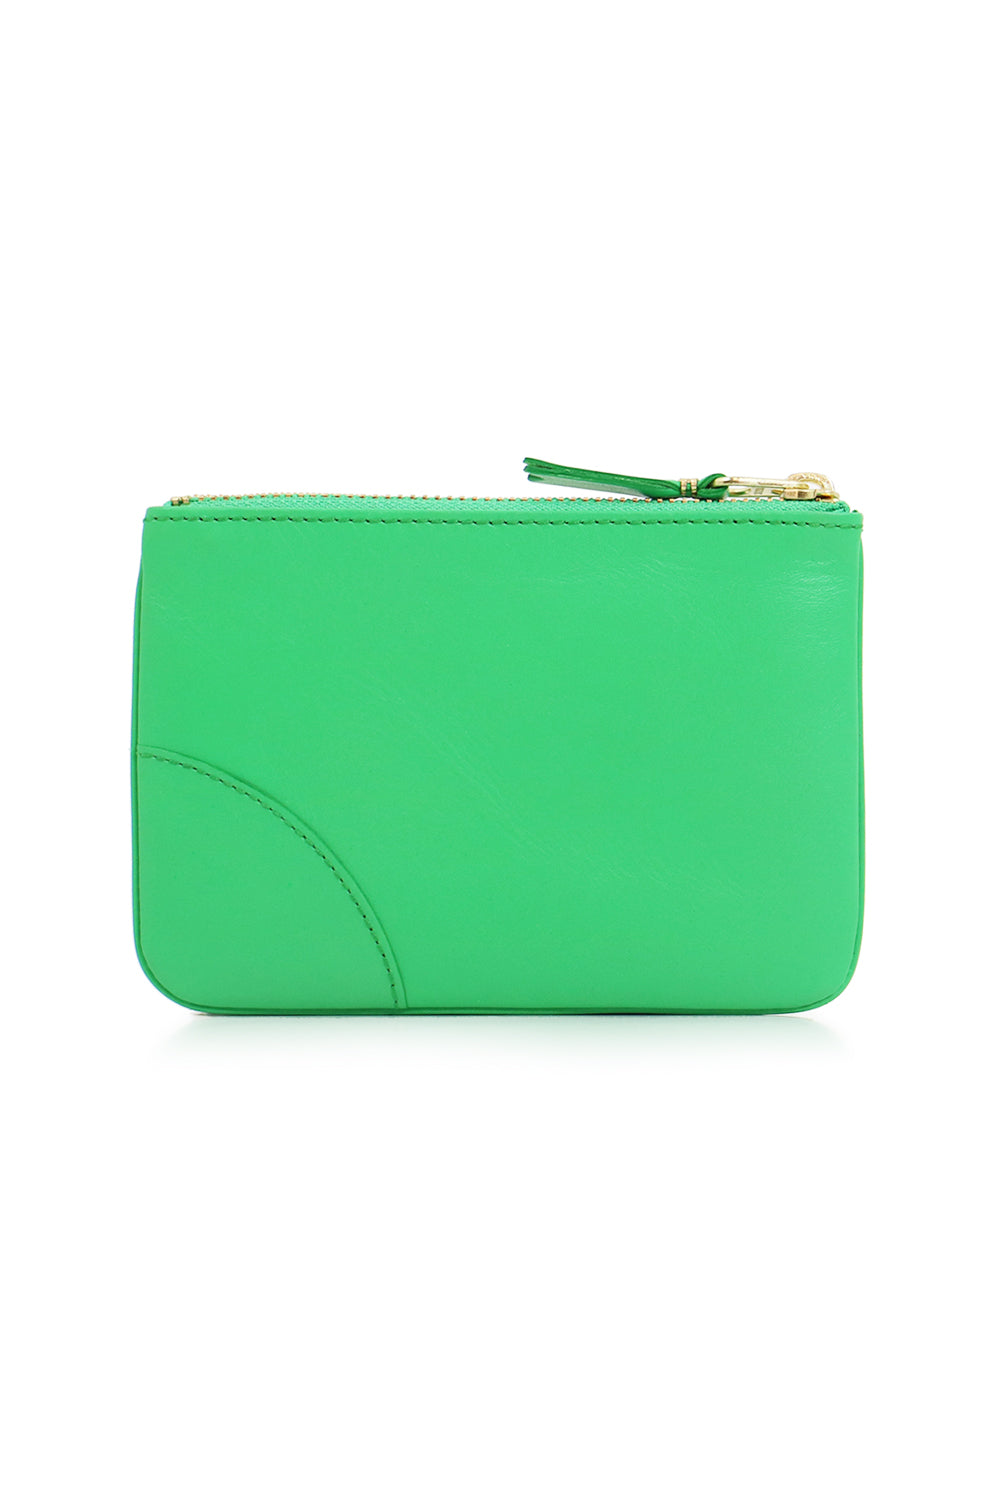 COMME DES GARCONS SMALL CLASSIC LEATHER POUCH GREEN – Parlour X